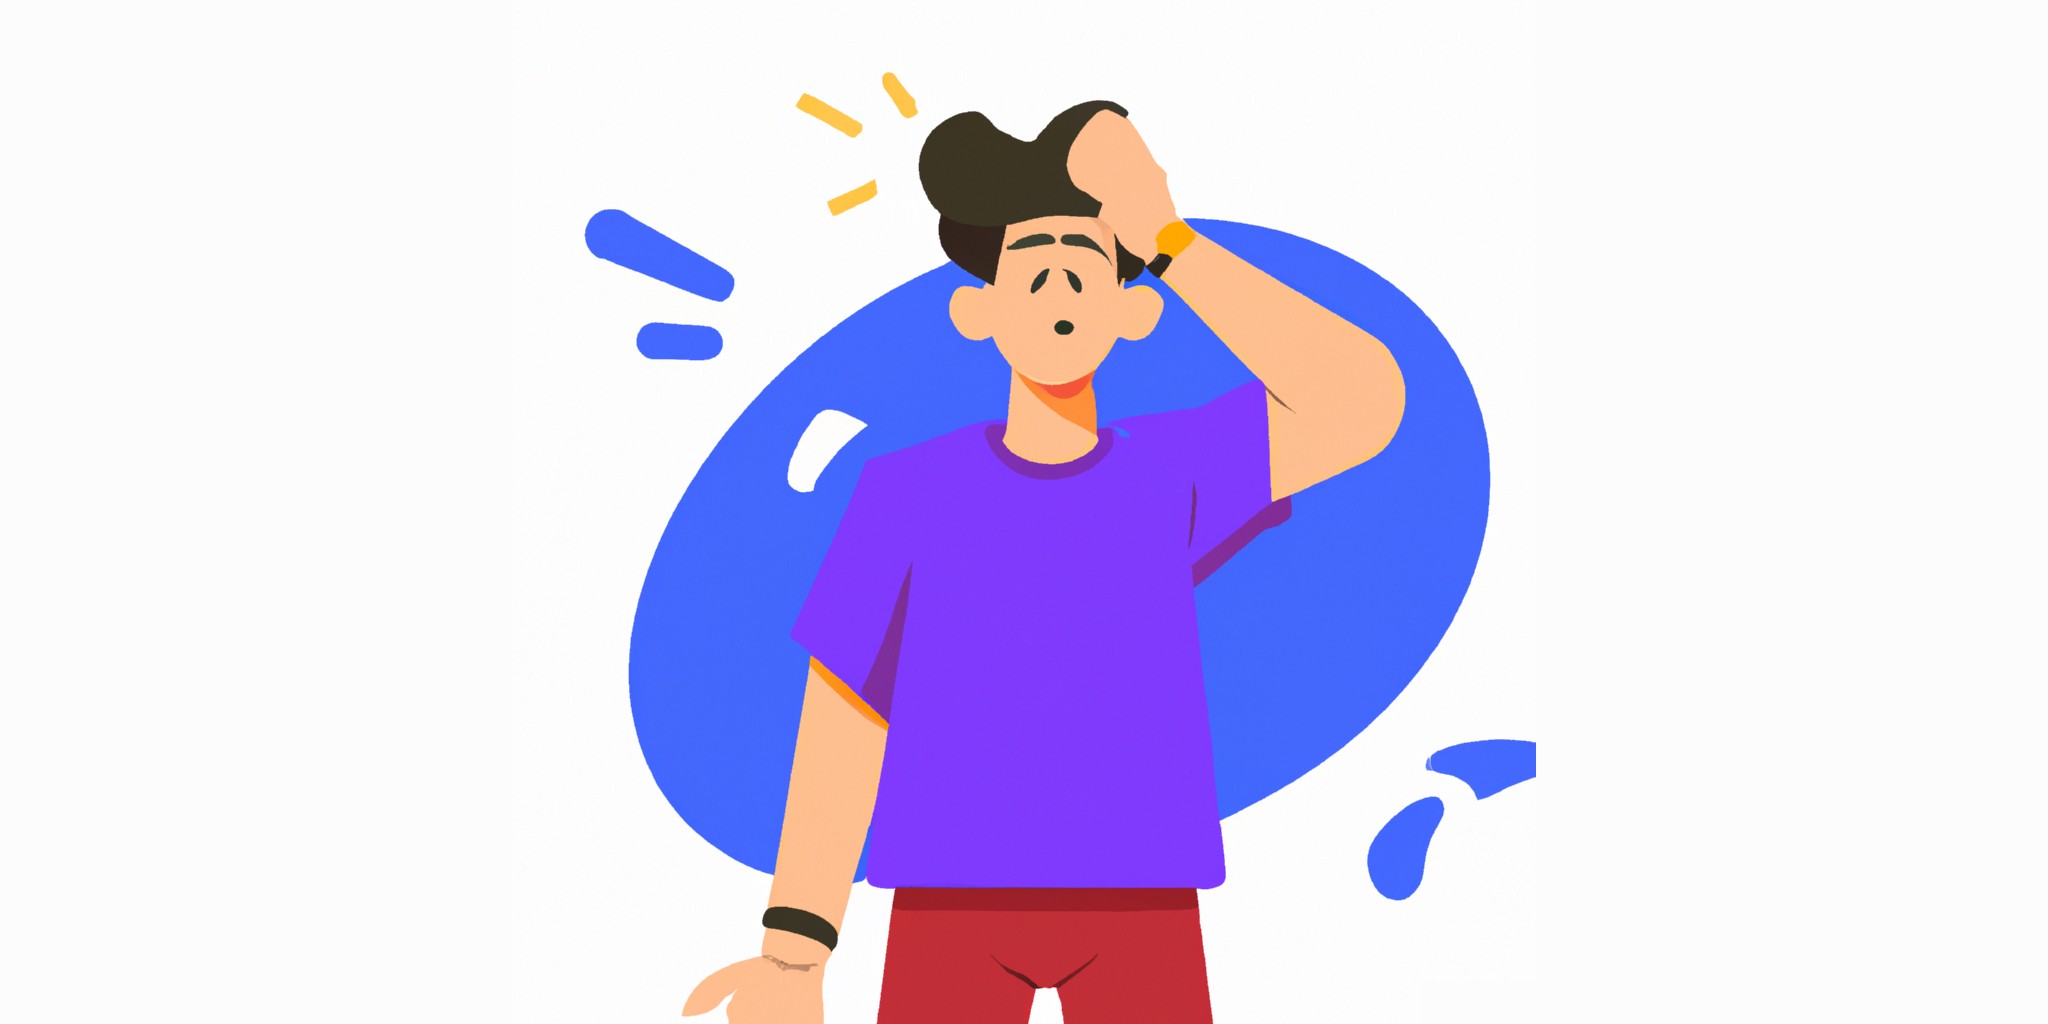 person making a mistake in flat illustration style with gradients and white background